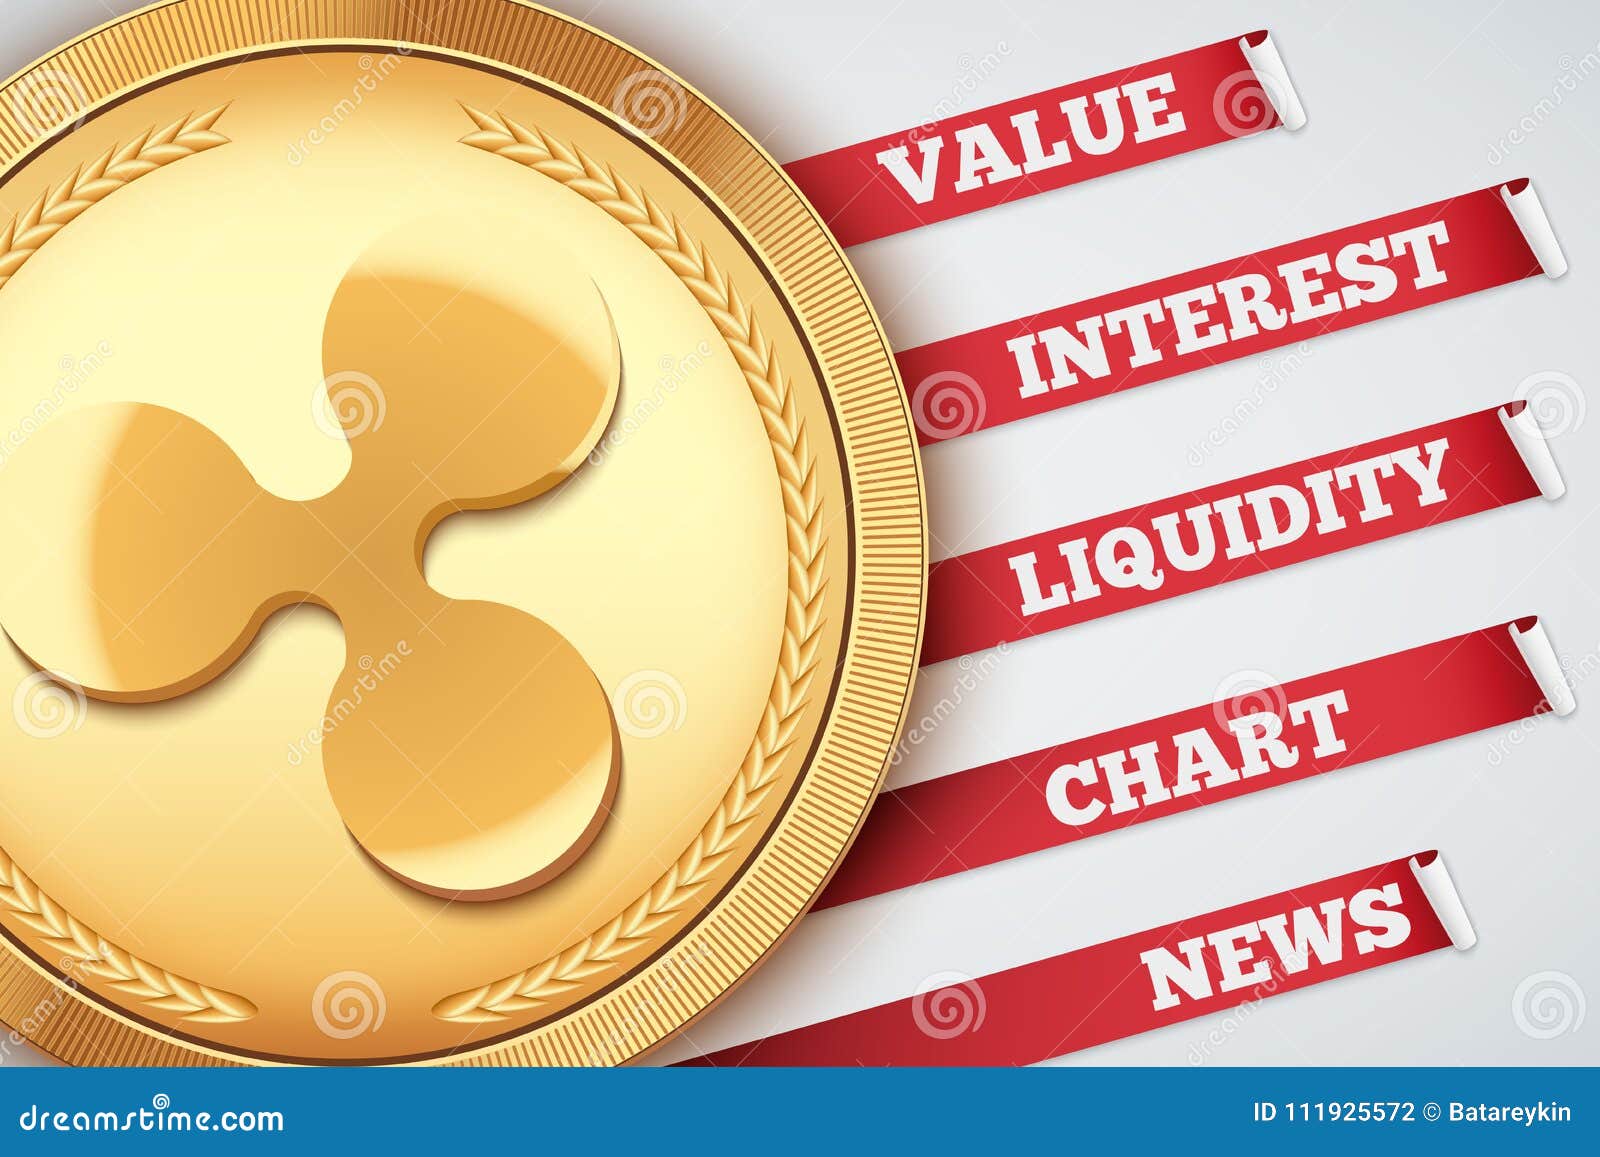 Background Of Ripple Cryptocurrency Infographic Stock ...